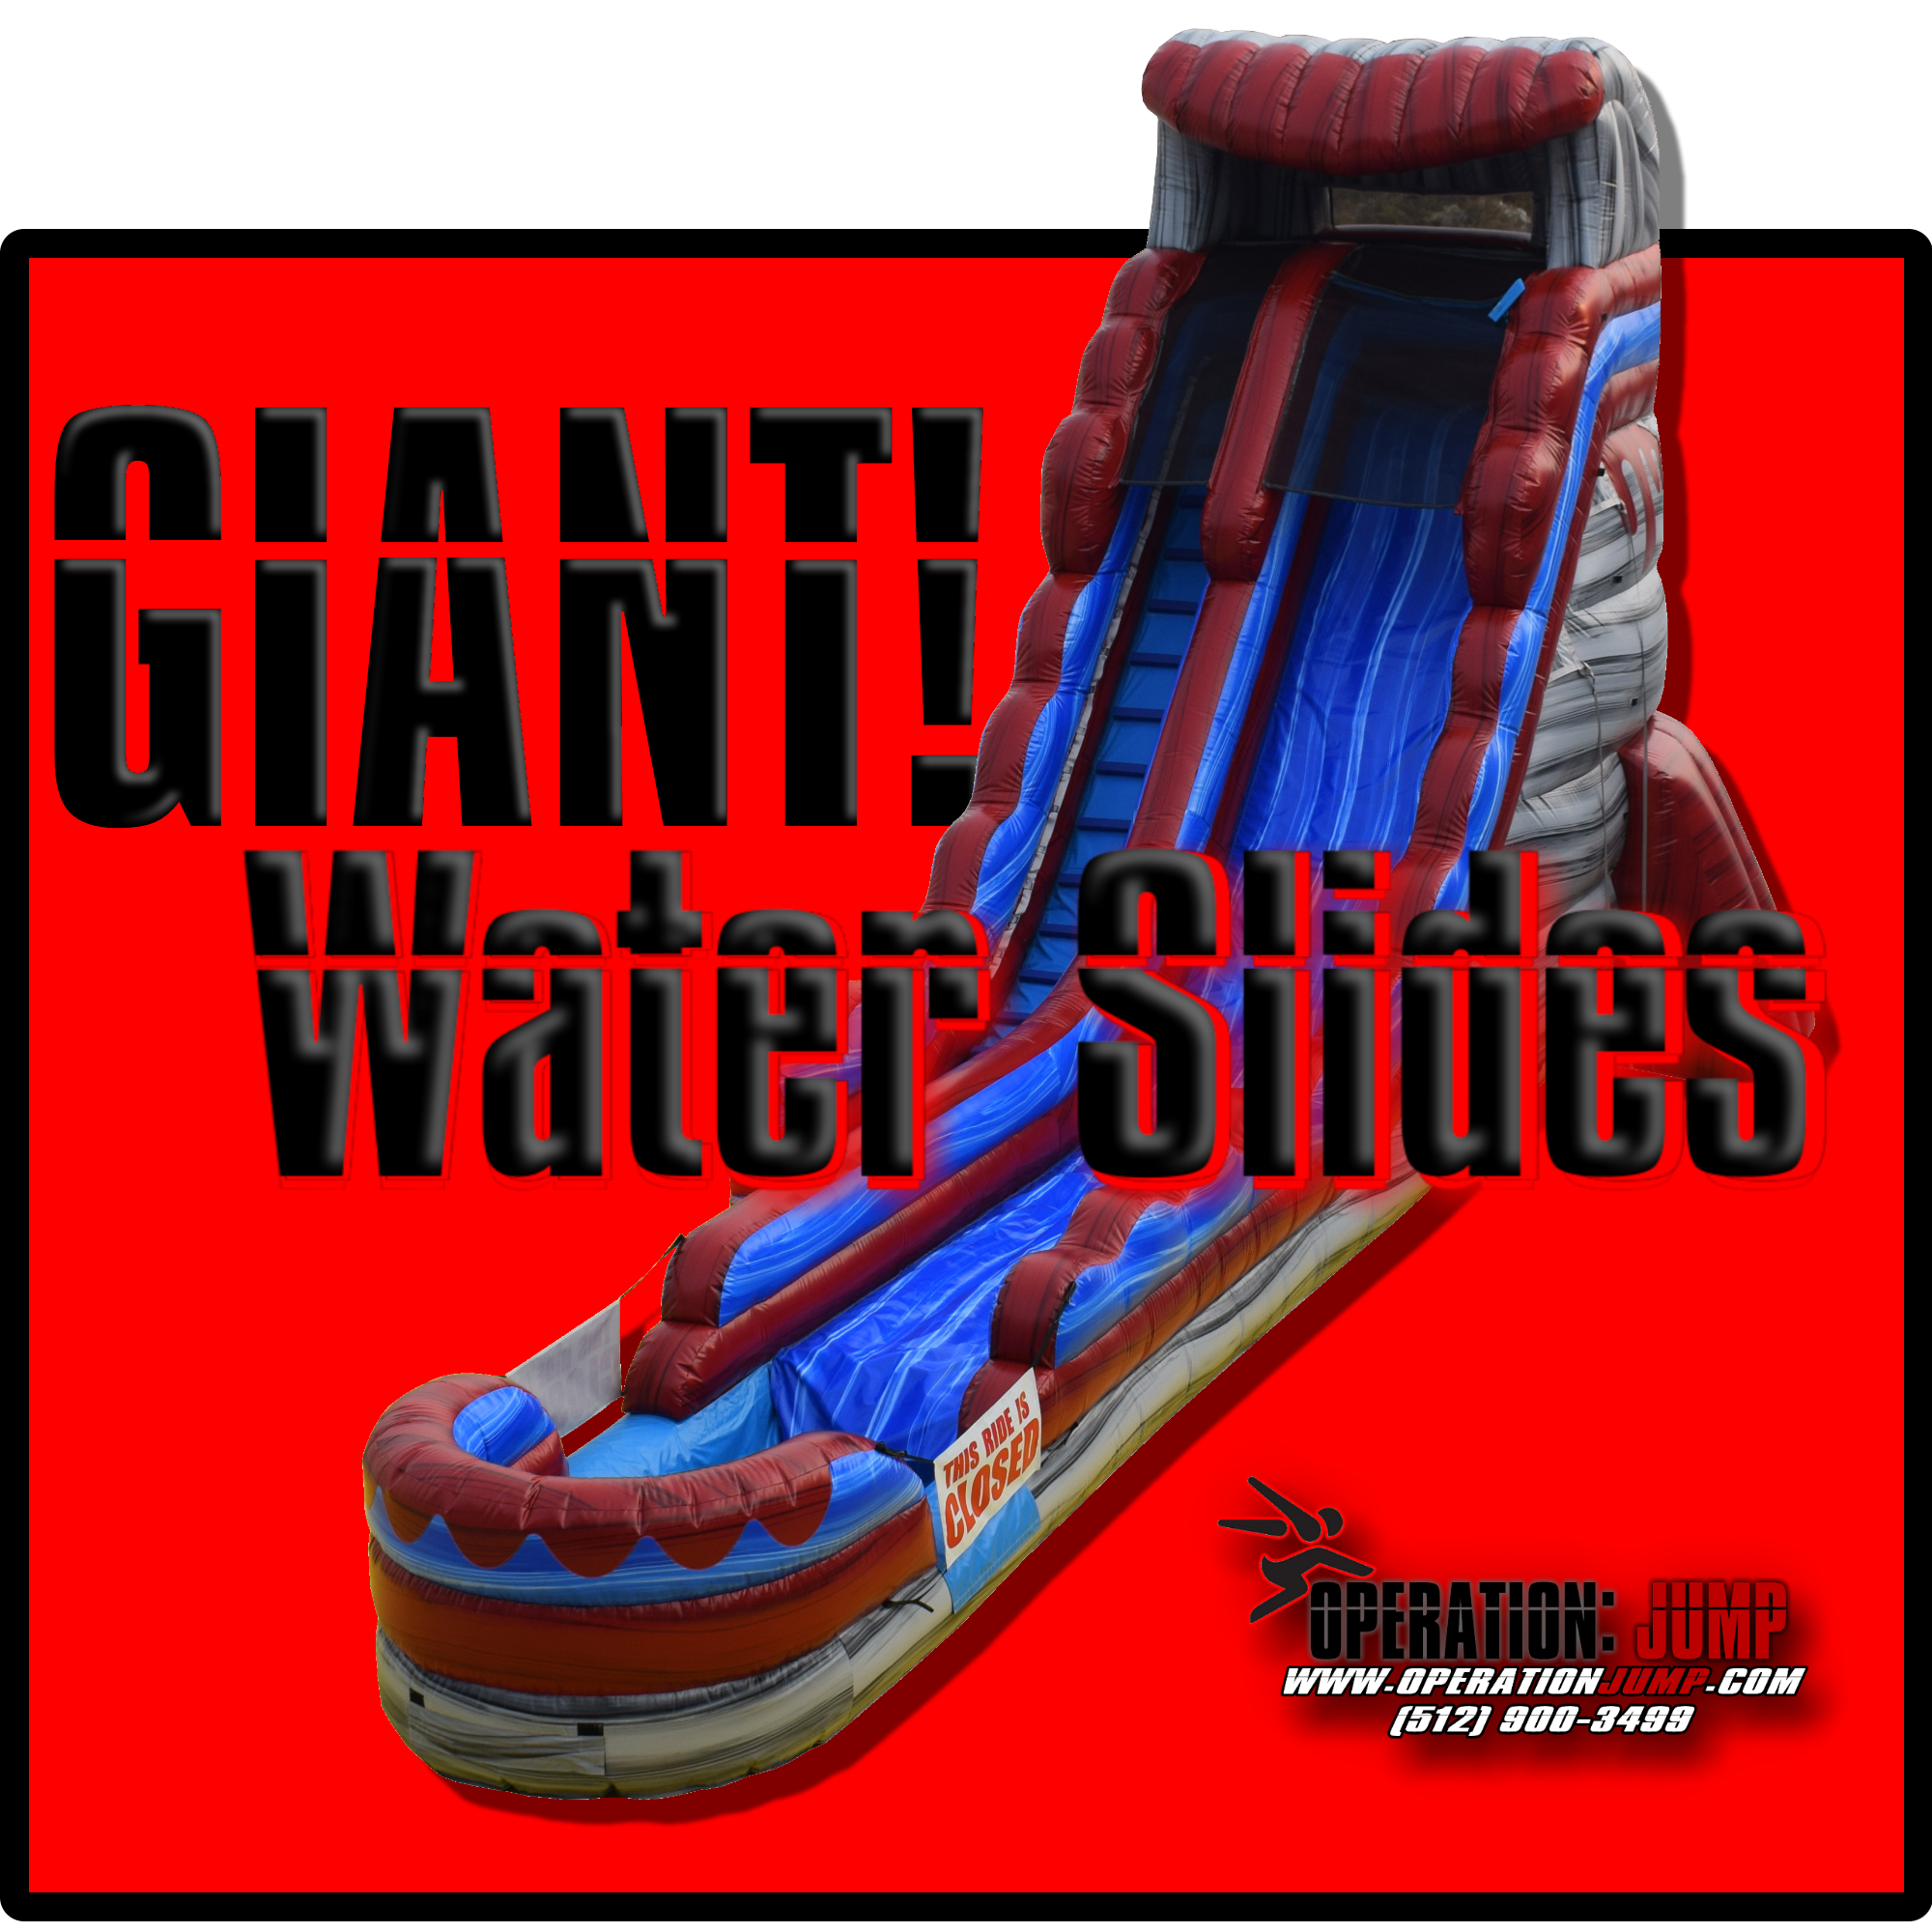 Giant Inflatable Water Slides & Slip and Slide Rentals